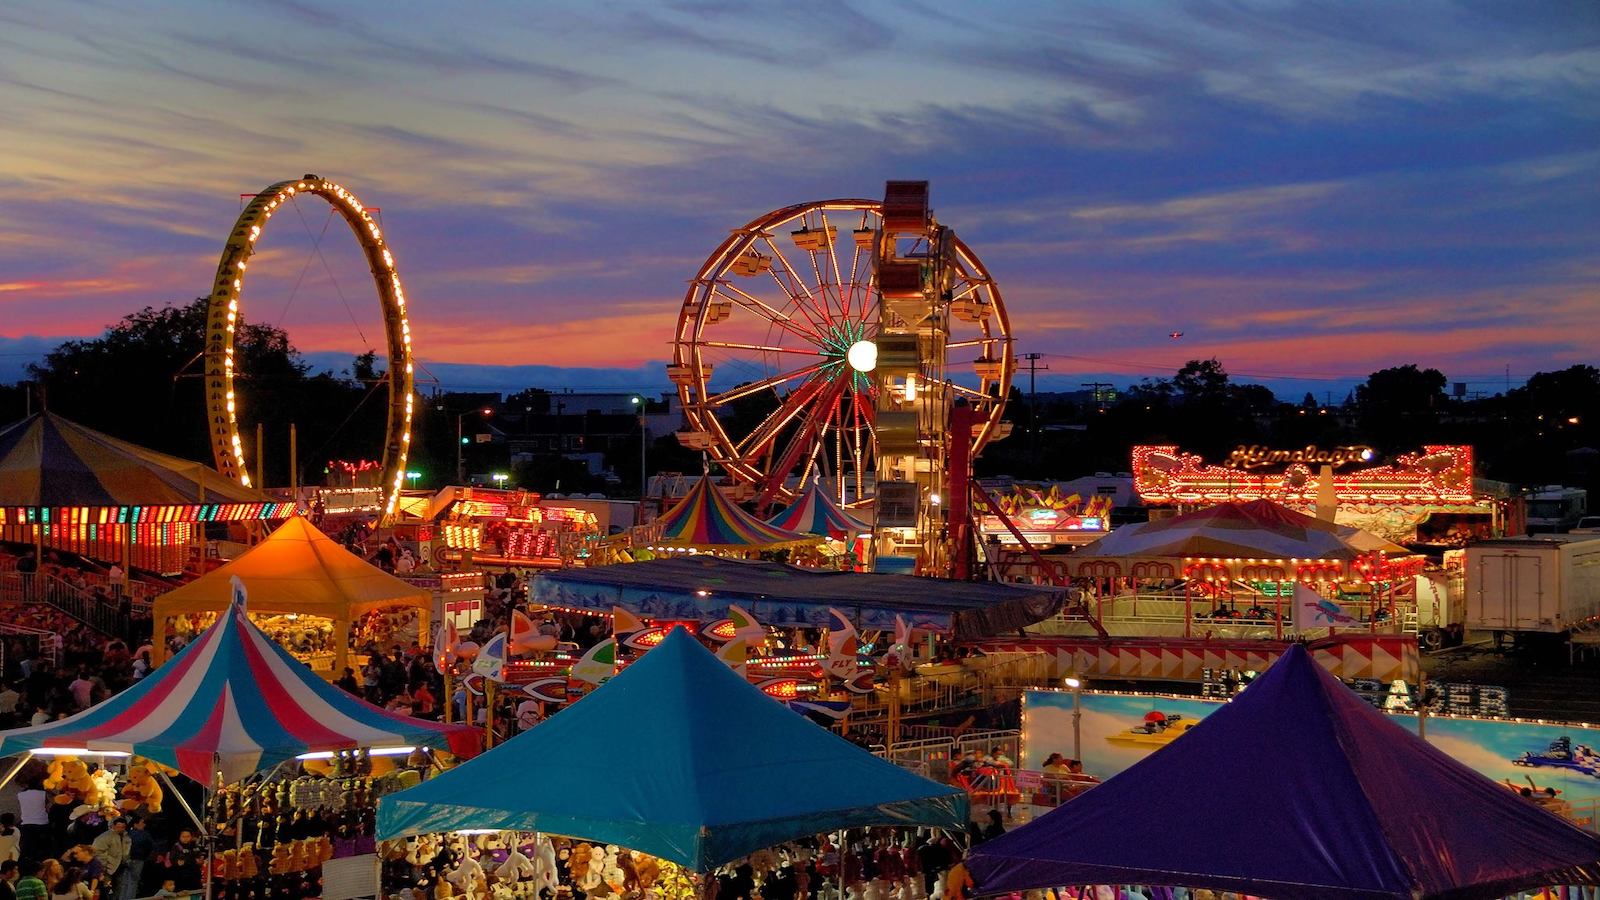 San Mateo County Fair ferris wheels and tents lit up at sunset